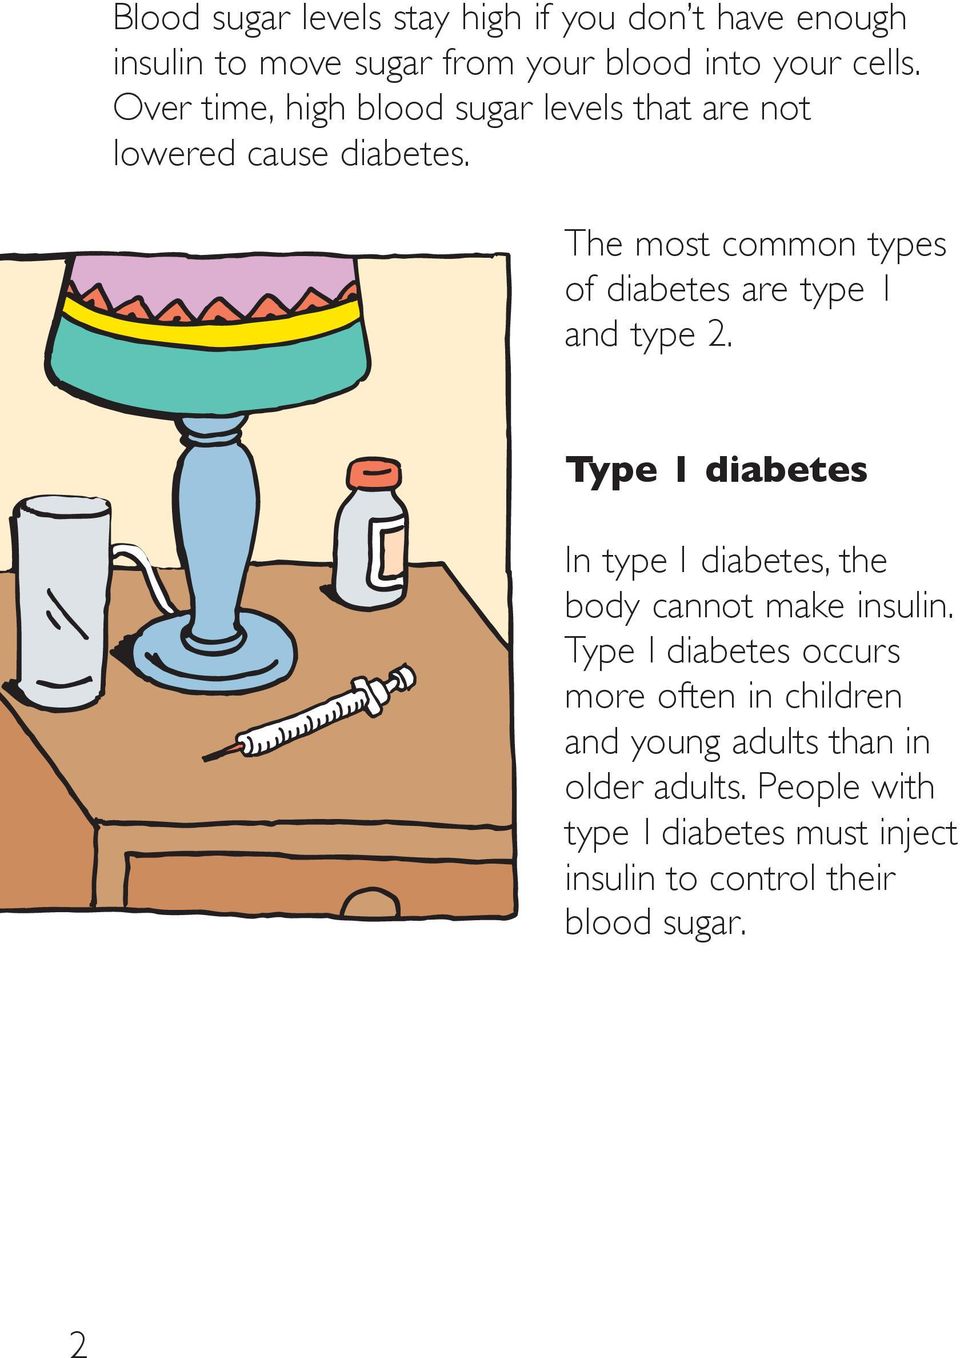 The most common types of diabetes are type 1 and type 2.